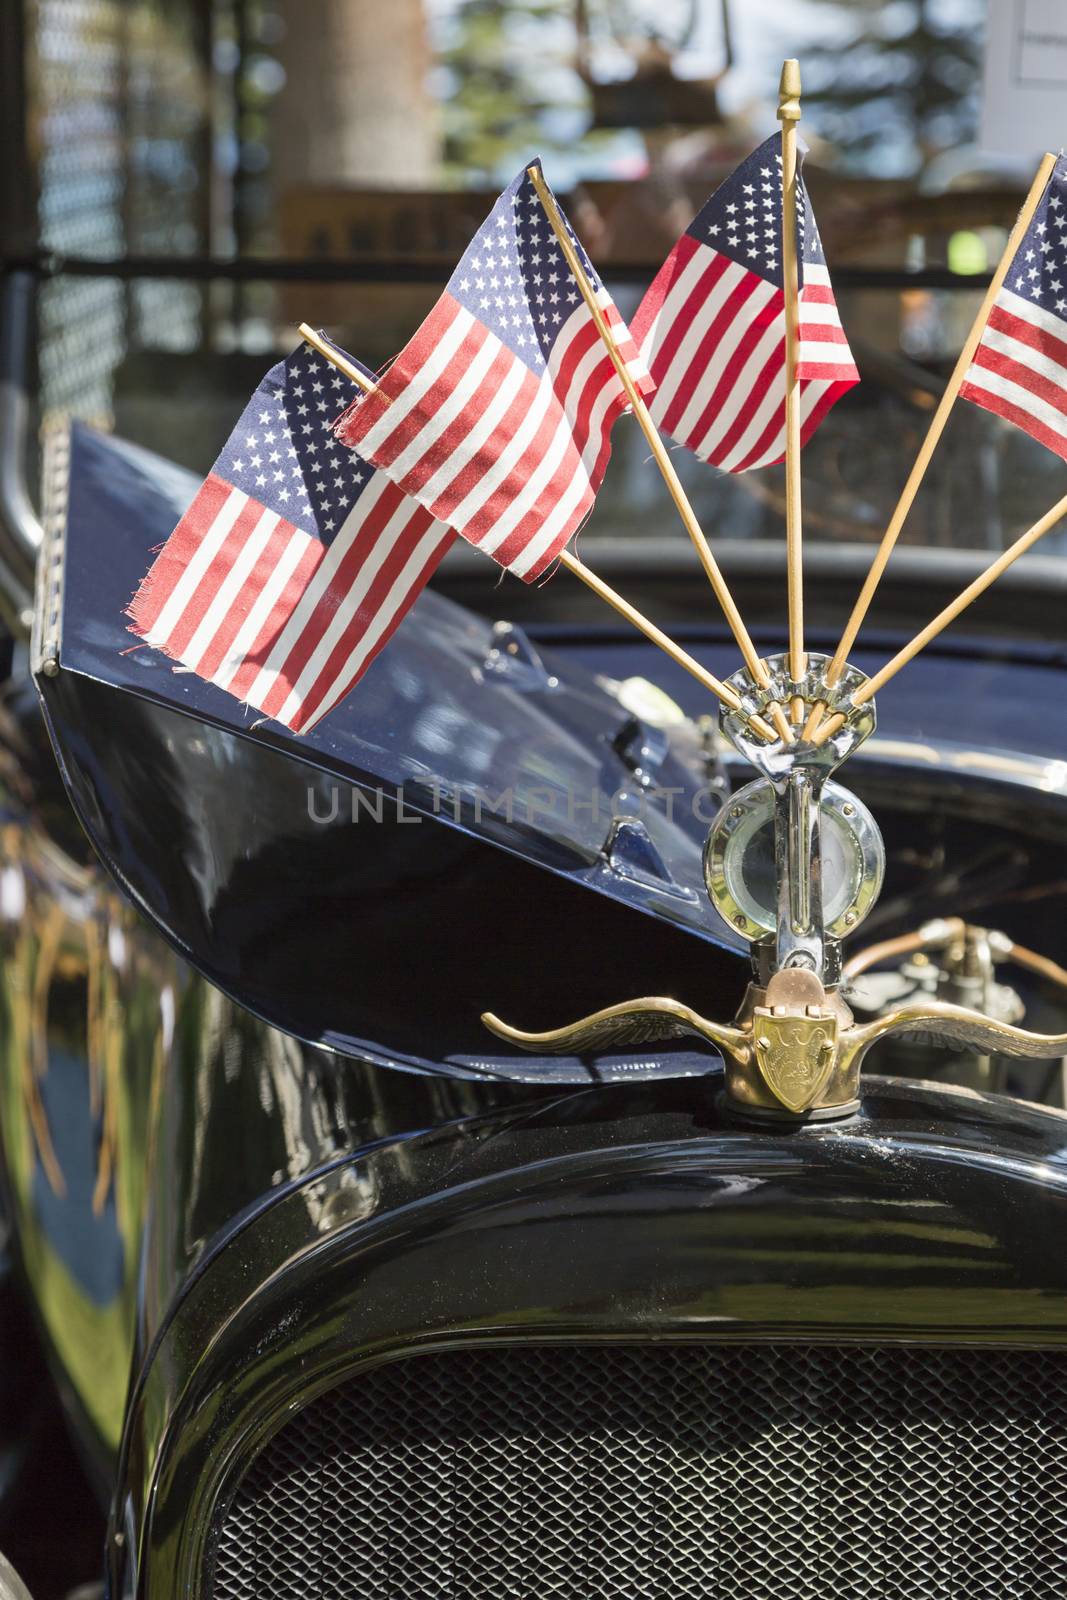 American Flags On Hood Ornament of Classic Vintage Car.